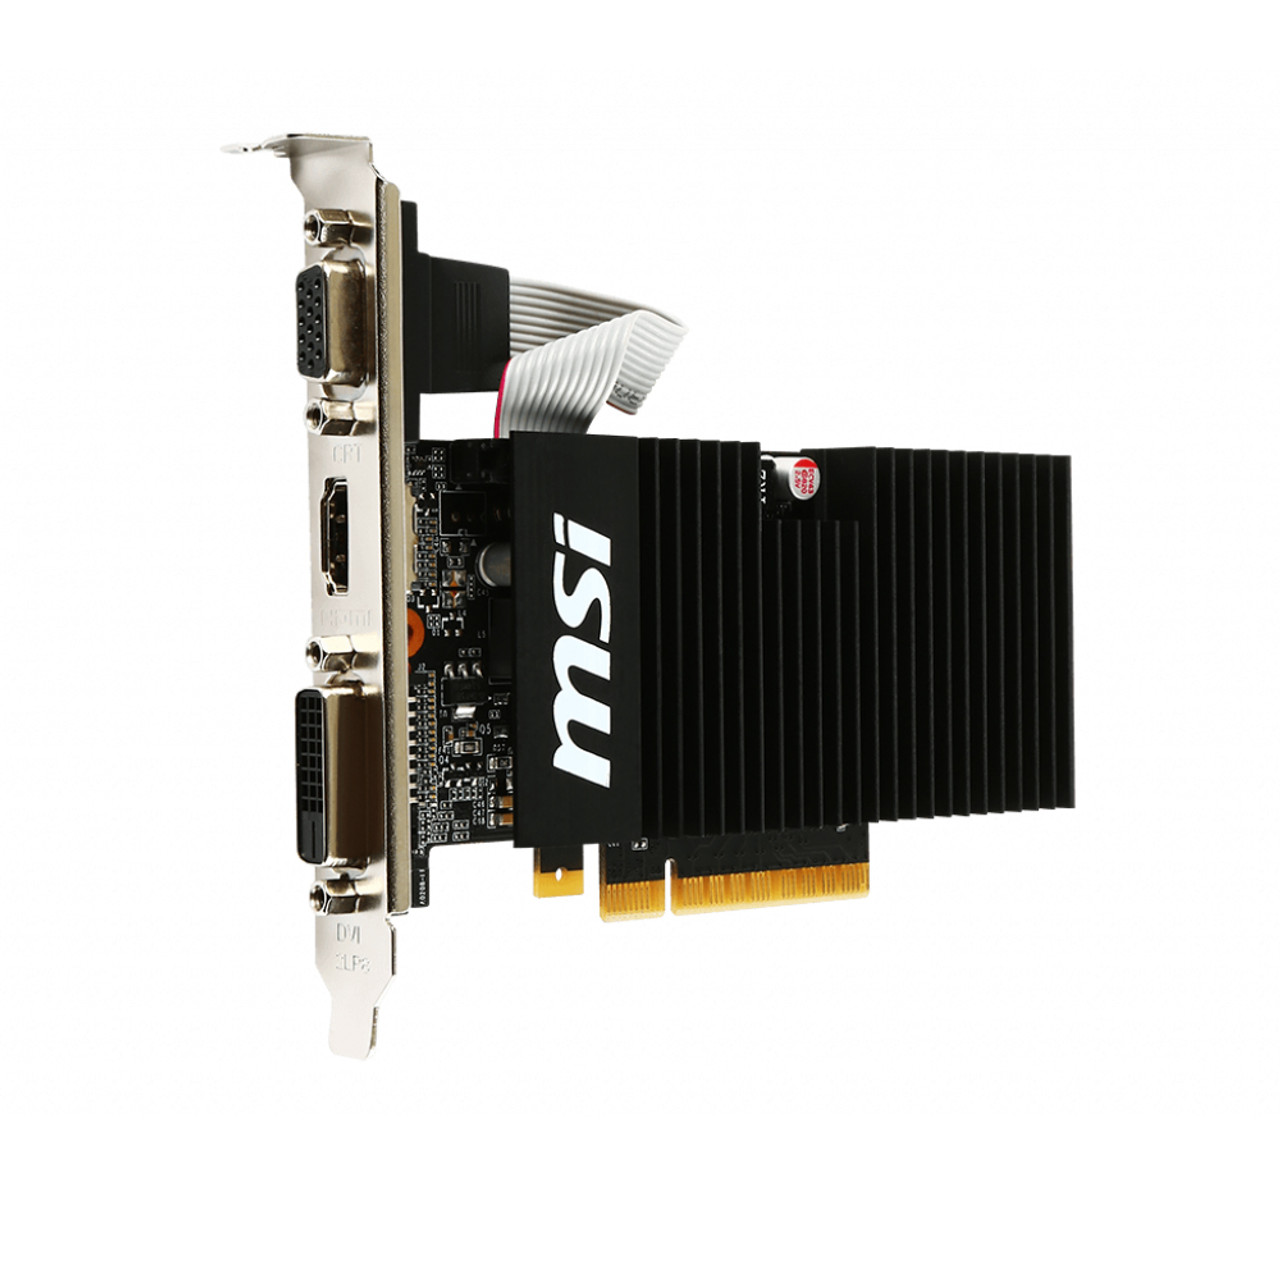  Gigabyte GeForce GT 710 1GB Graphic Cards and Support